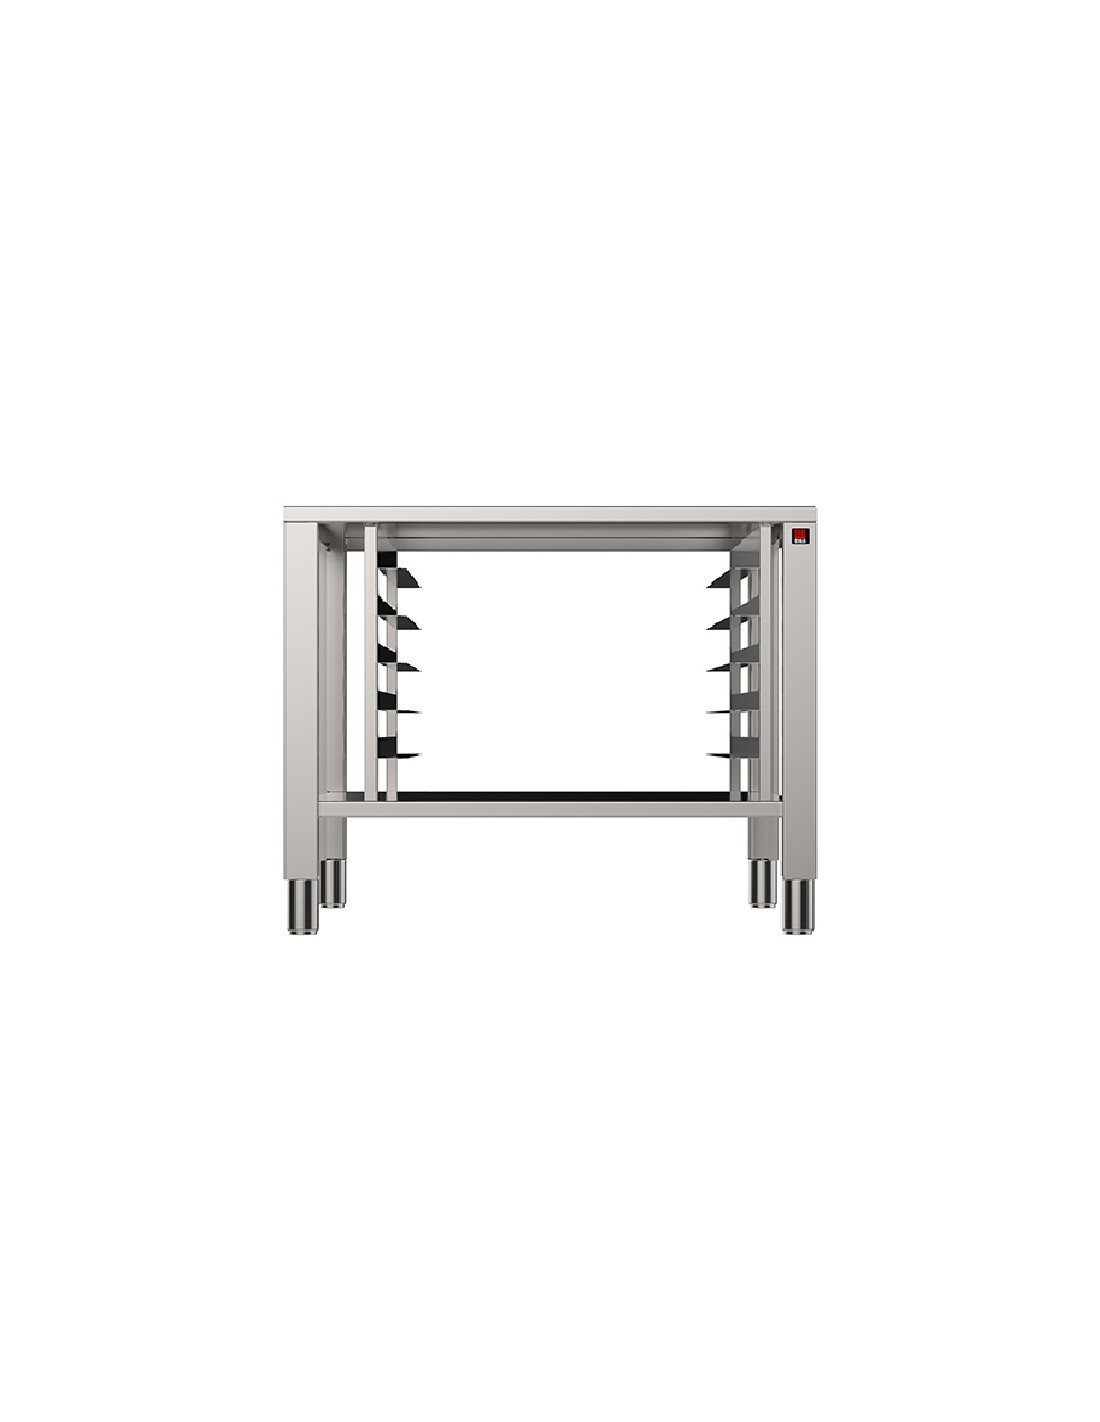 Fixed table - Acciaio inox AISI 430 - For ovens 6/10 GN 2/1 - Dimensions cm 85 x 78.7 x77h